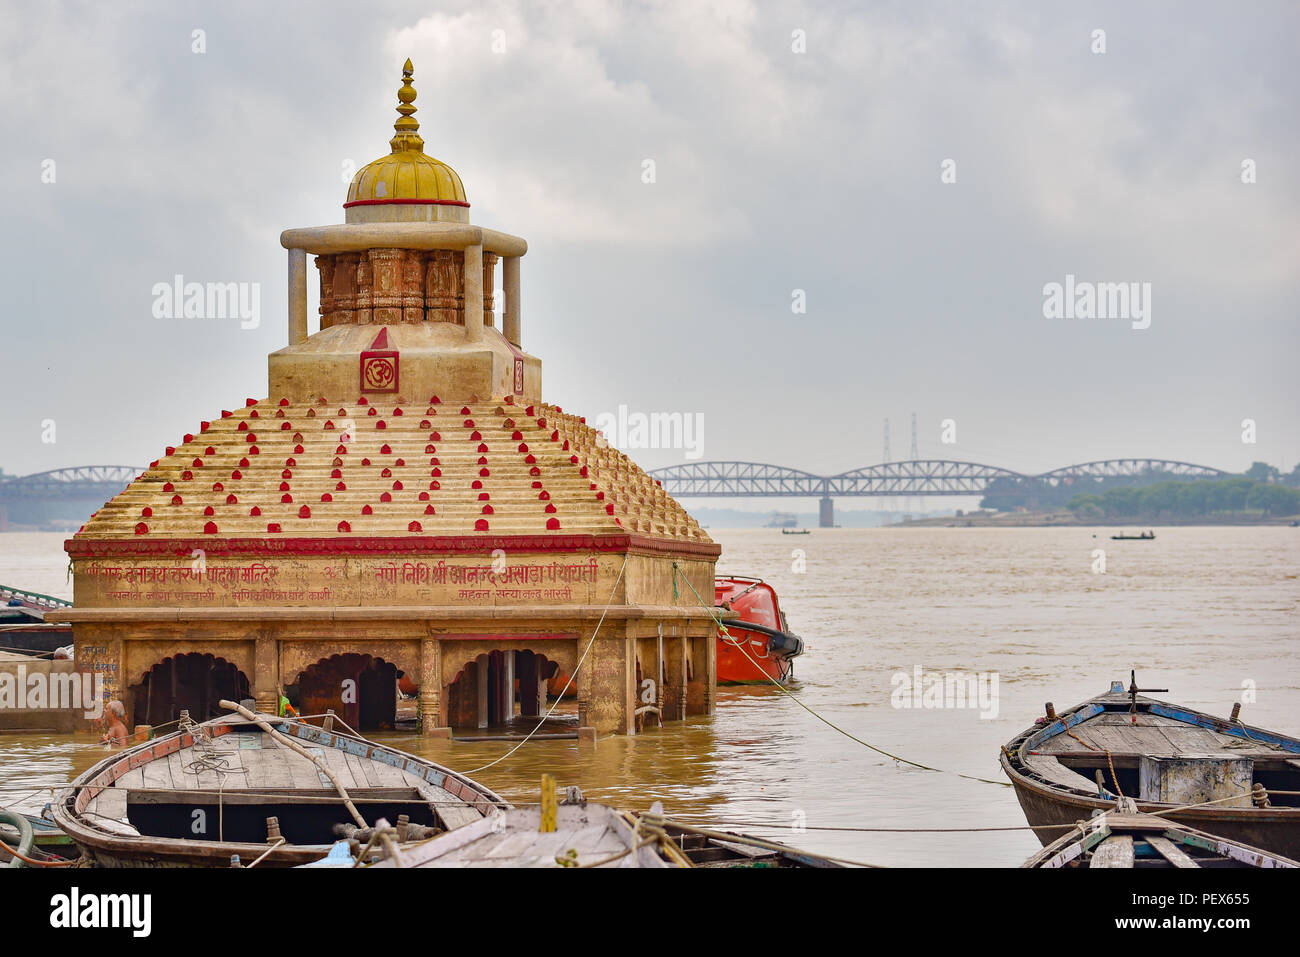 A Hindu temple under Ganges river Stock Photo